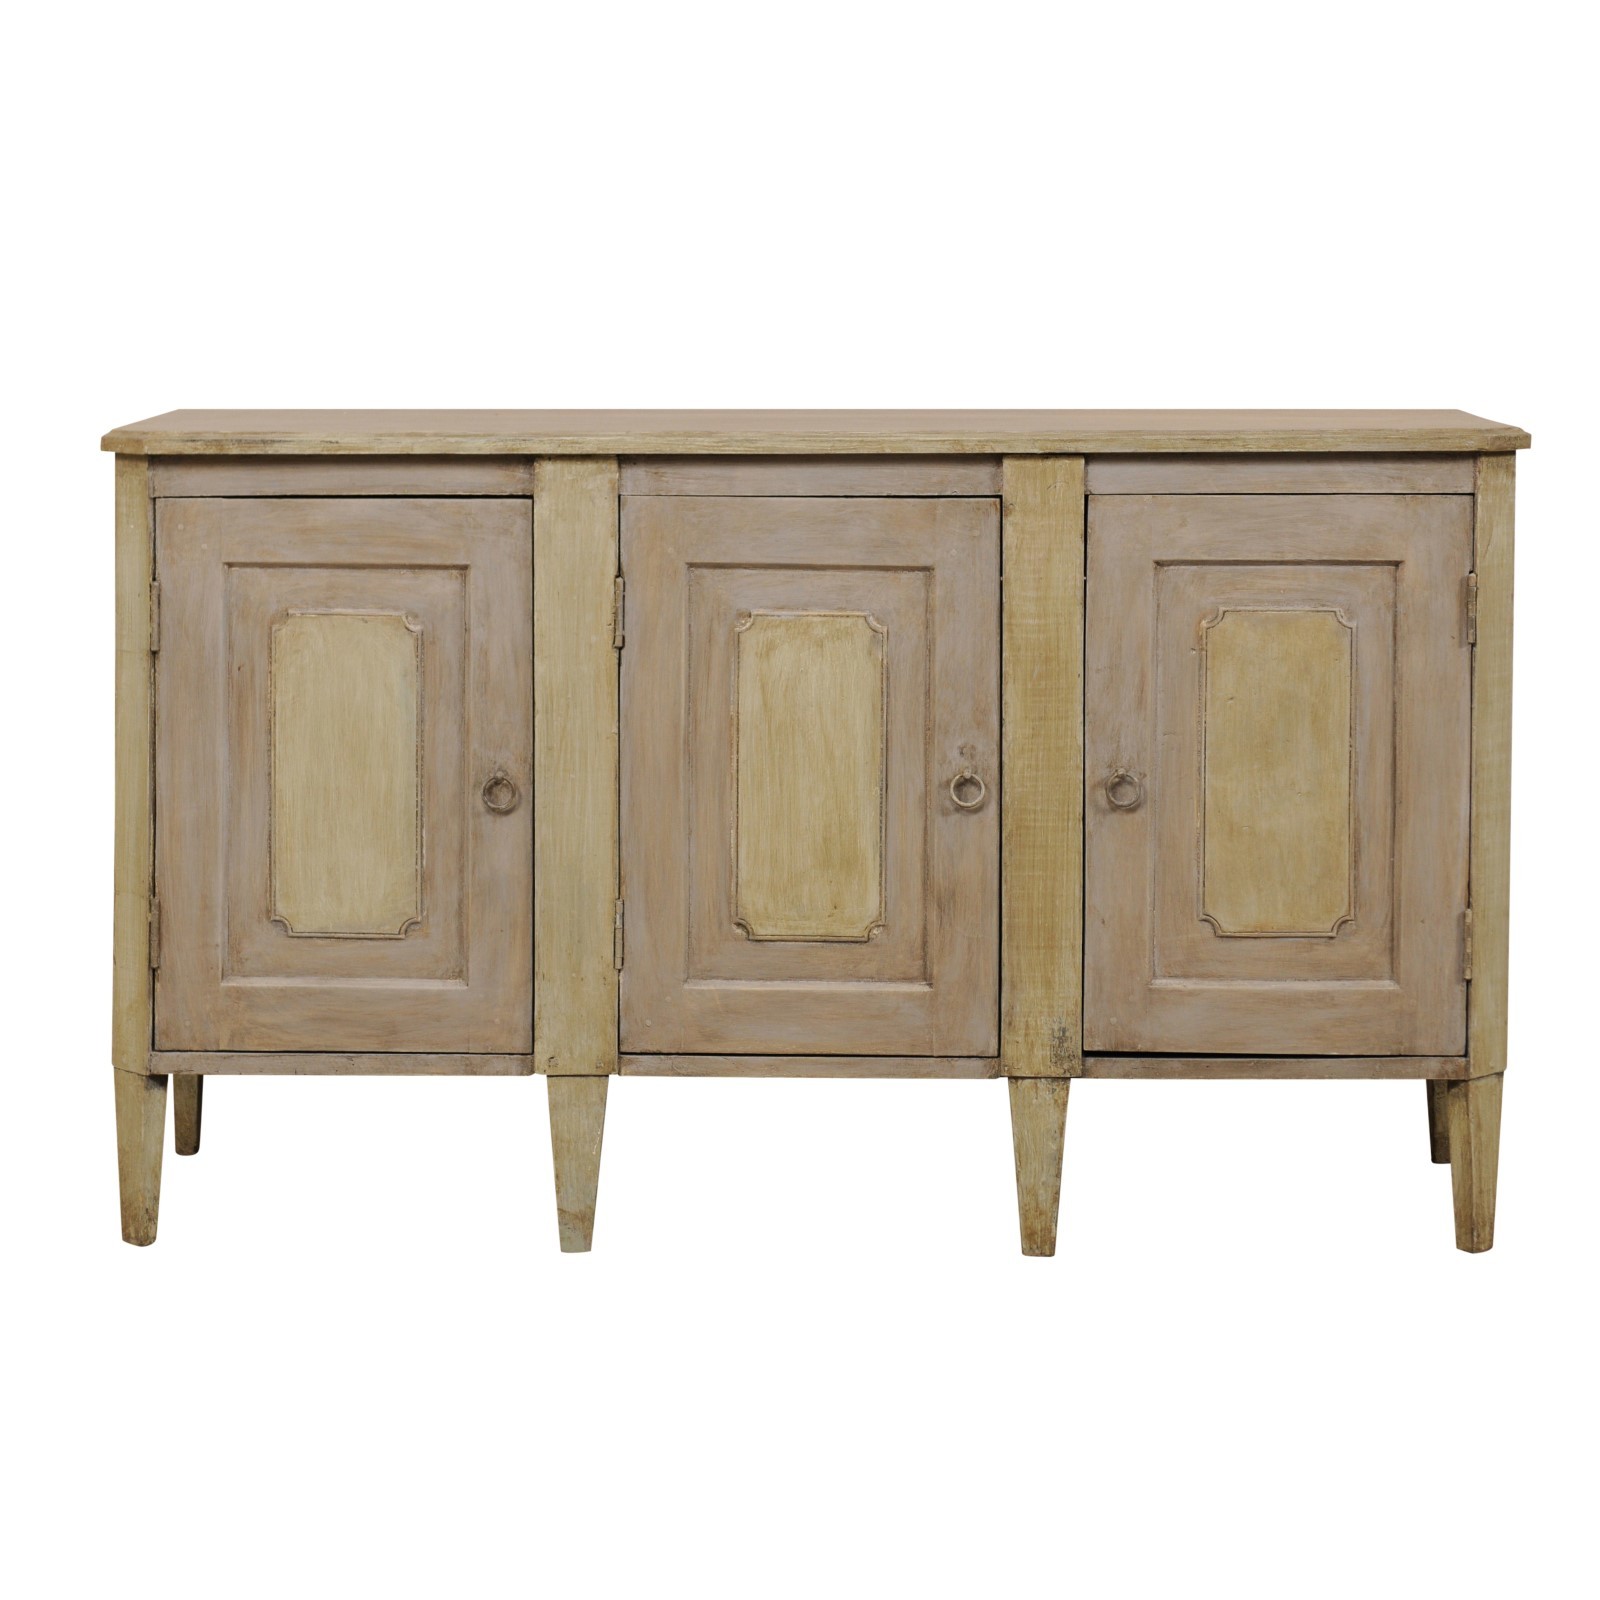 A Painted Wood Sideboard Cabinet